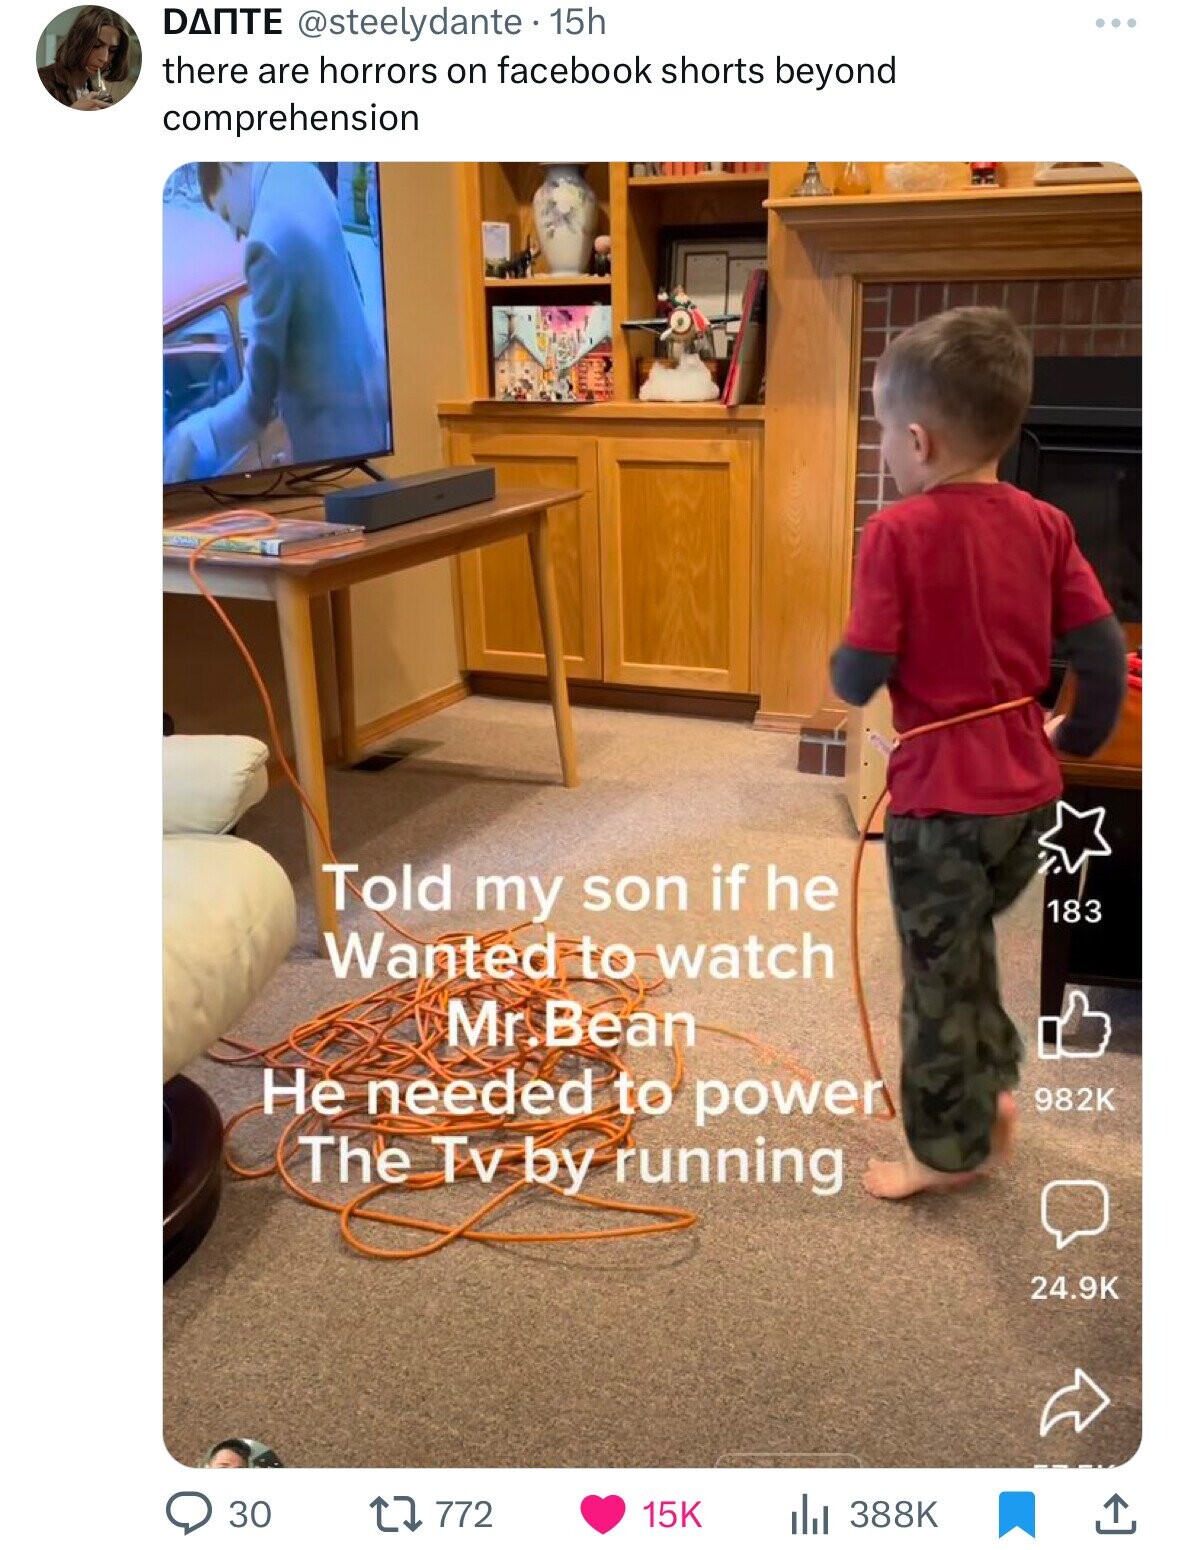 toddler - Dante . 15h there are horrors on facebook shorts beyond comprehension Told my son if he Wanted to watch M 183 Mr.Bean He needed to power The Tv by running 30 lil